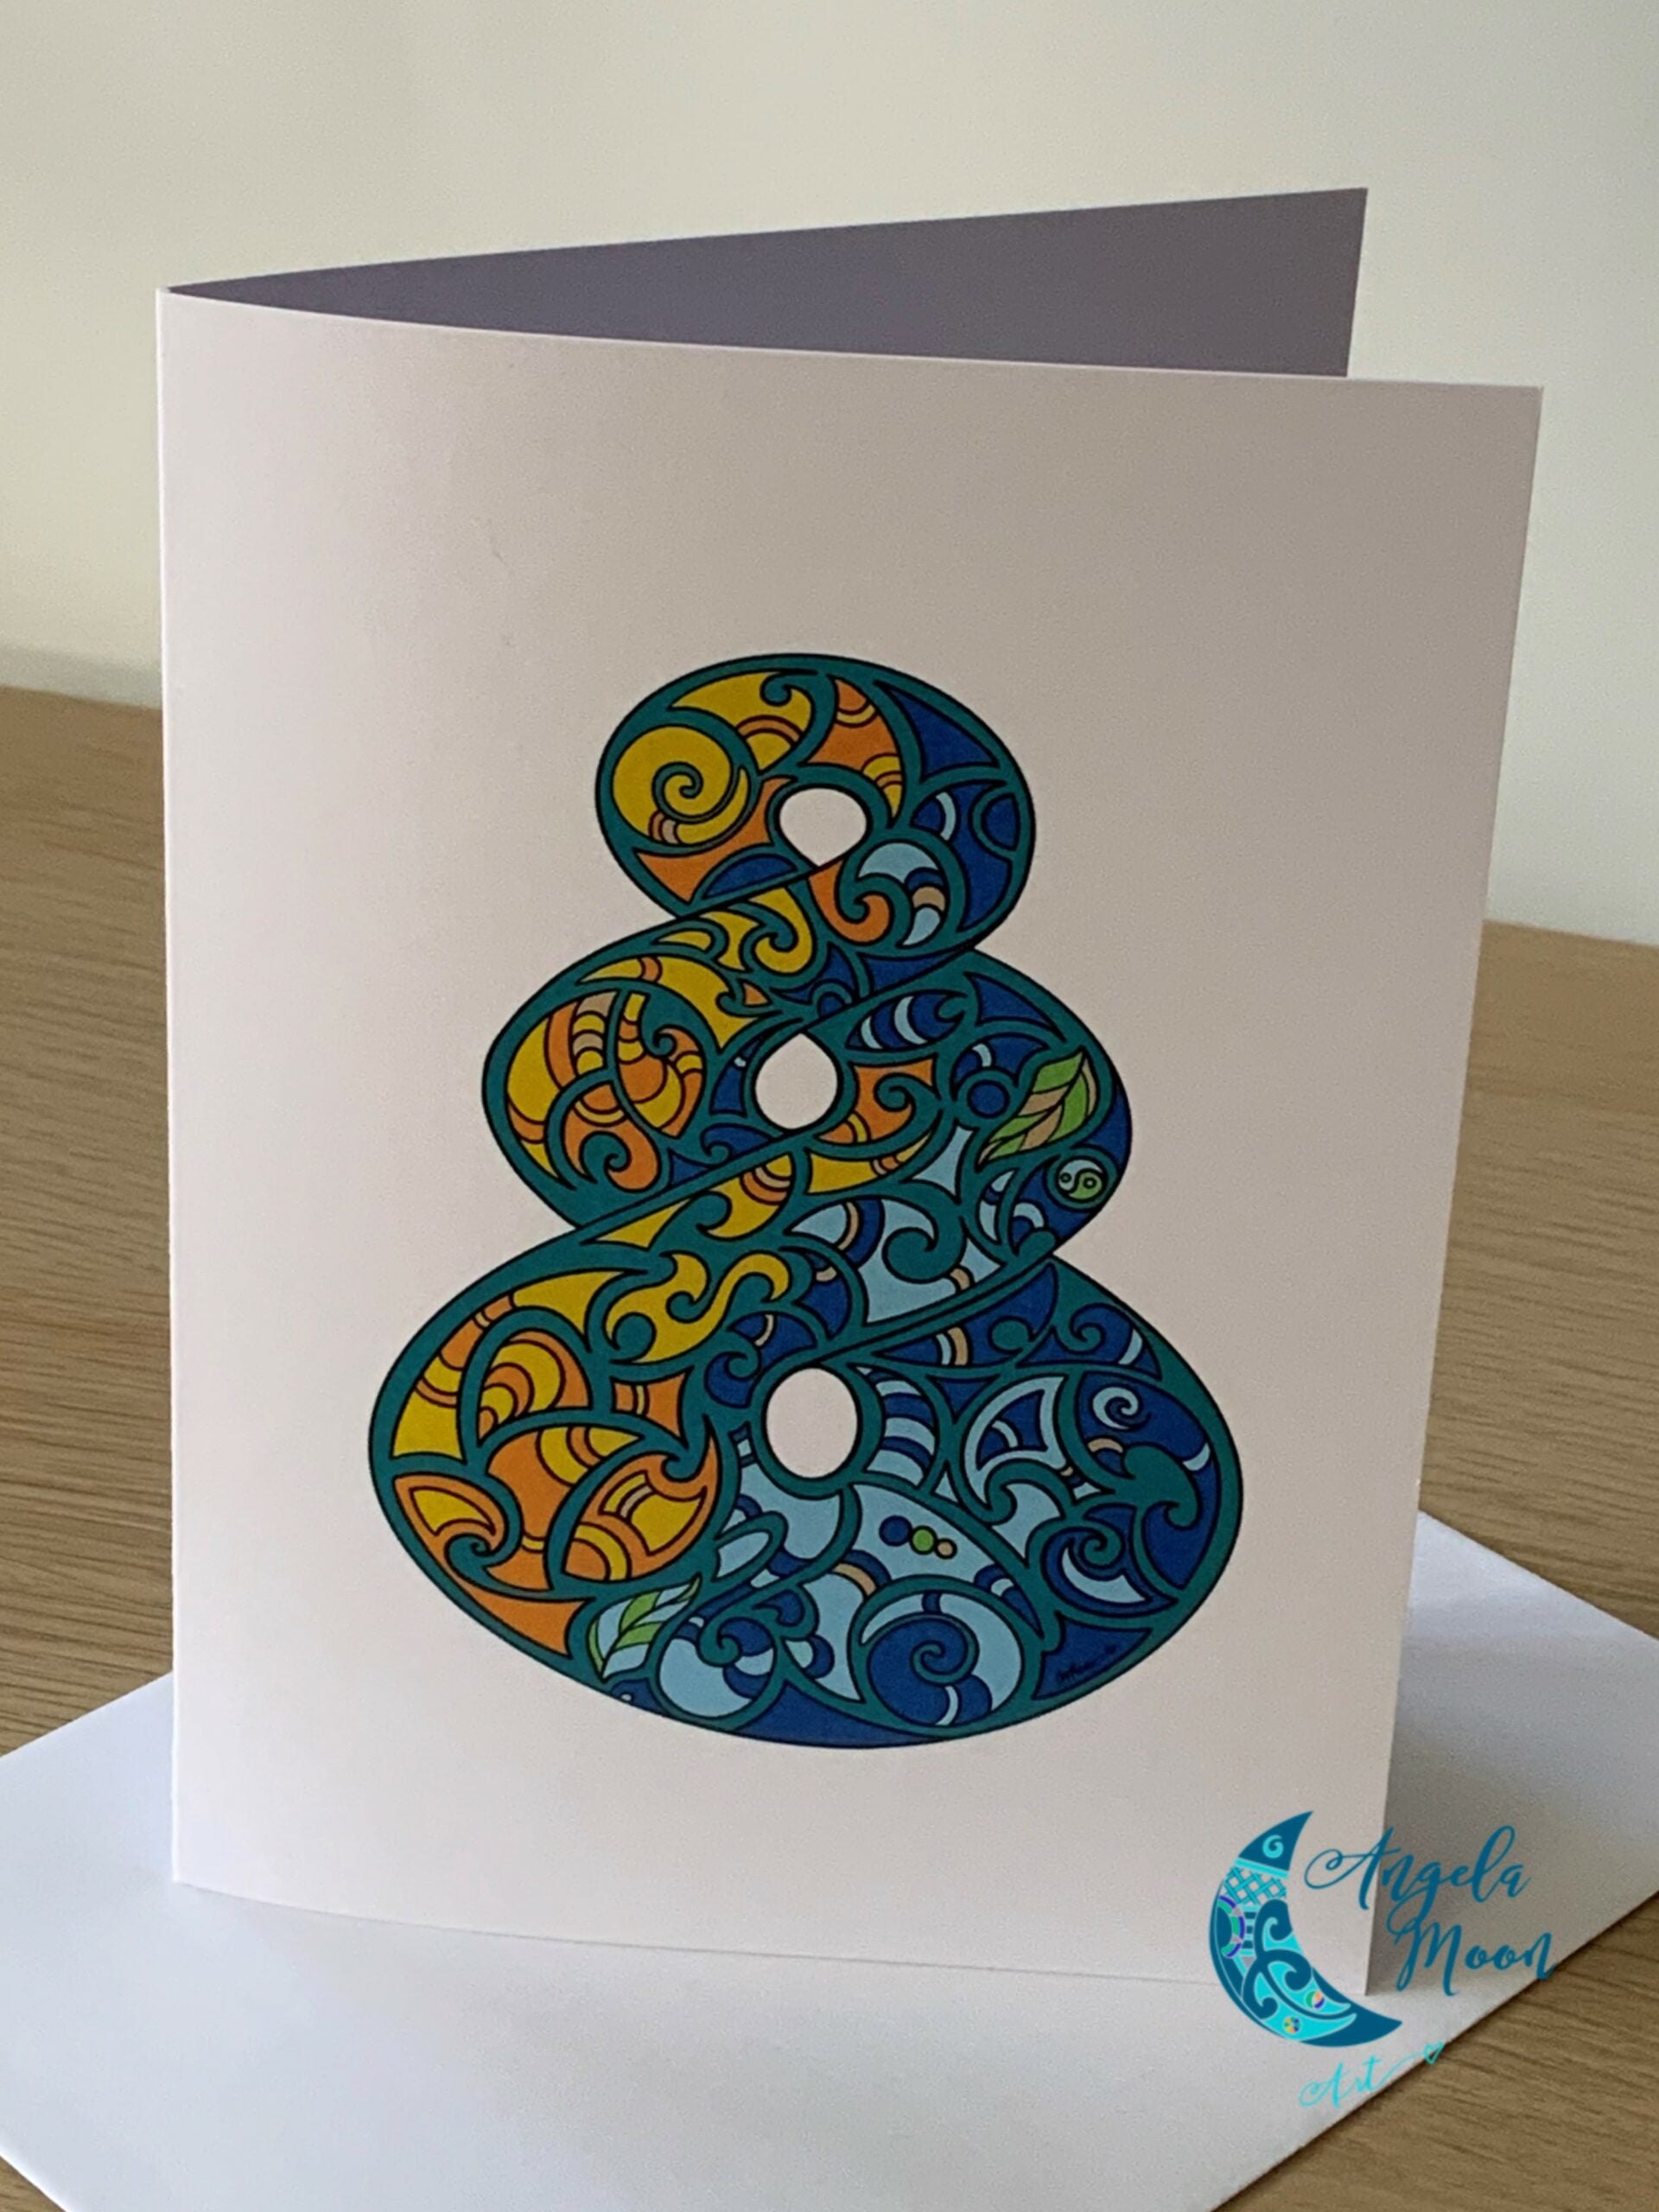 A colorful, artistic Pikorua Card from Angela Moon Art in New Zealand with intricate patterns displayed alongside its envelope on a wooden surface.